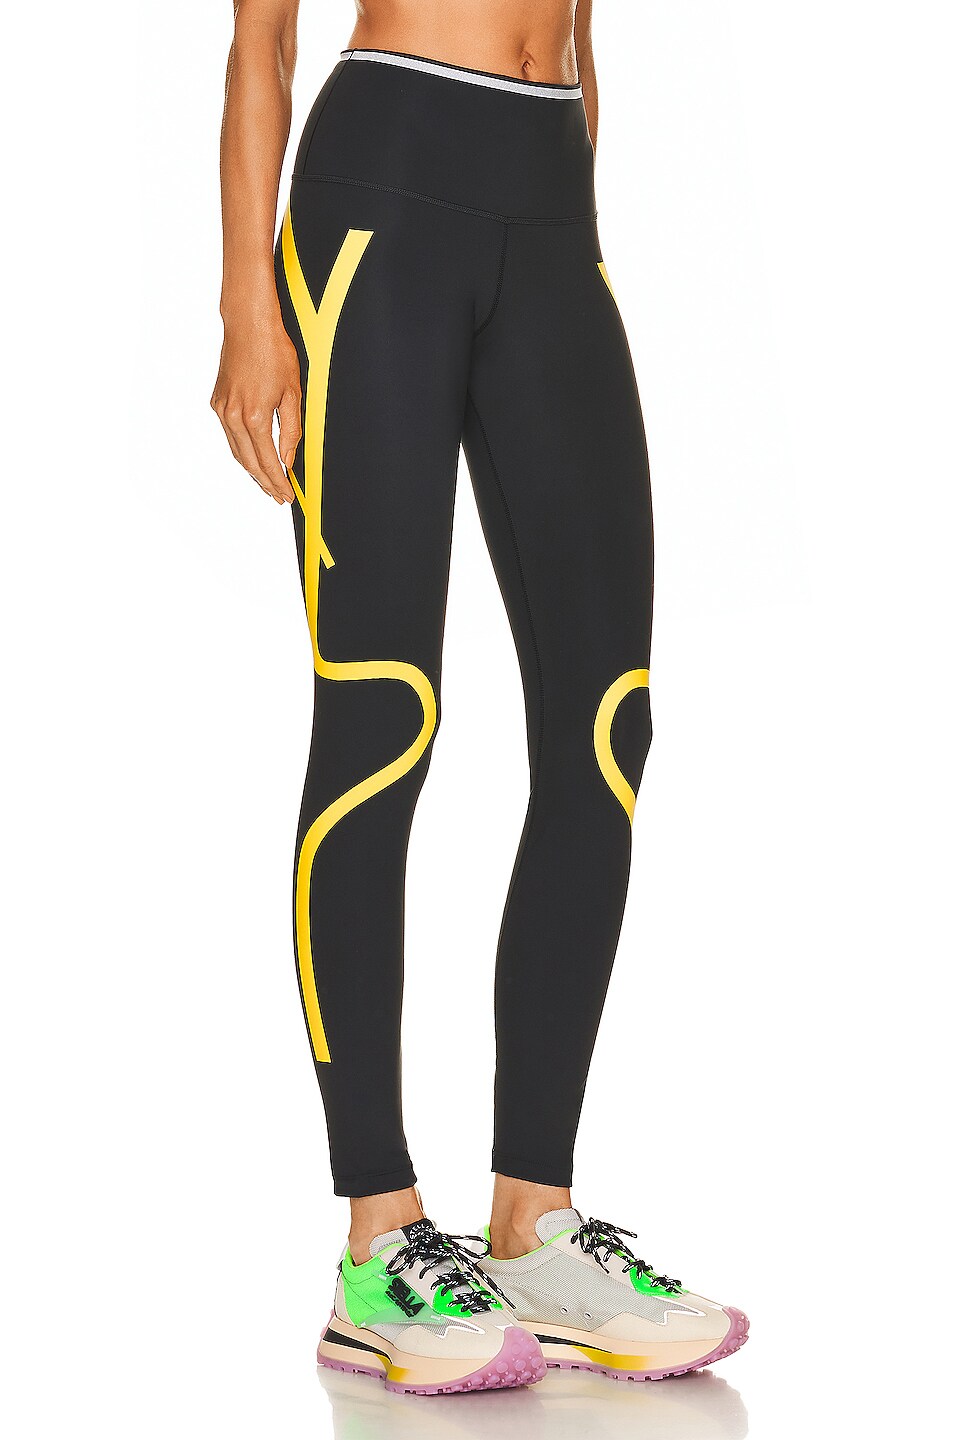 adidas by Stella McCartney True Pace Running Tight Pant in Black ...